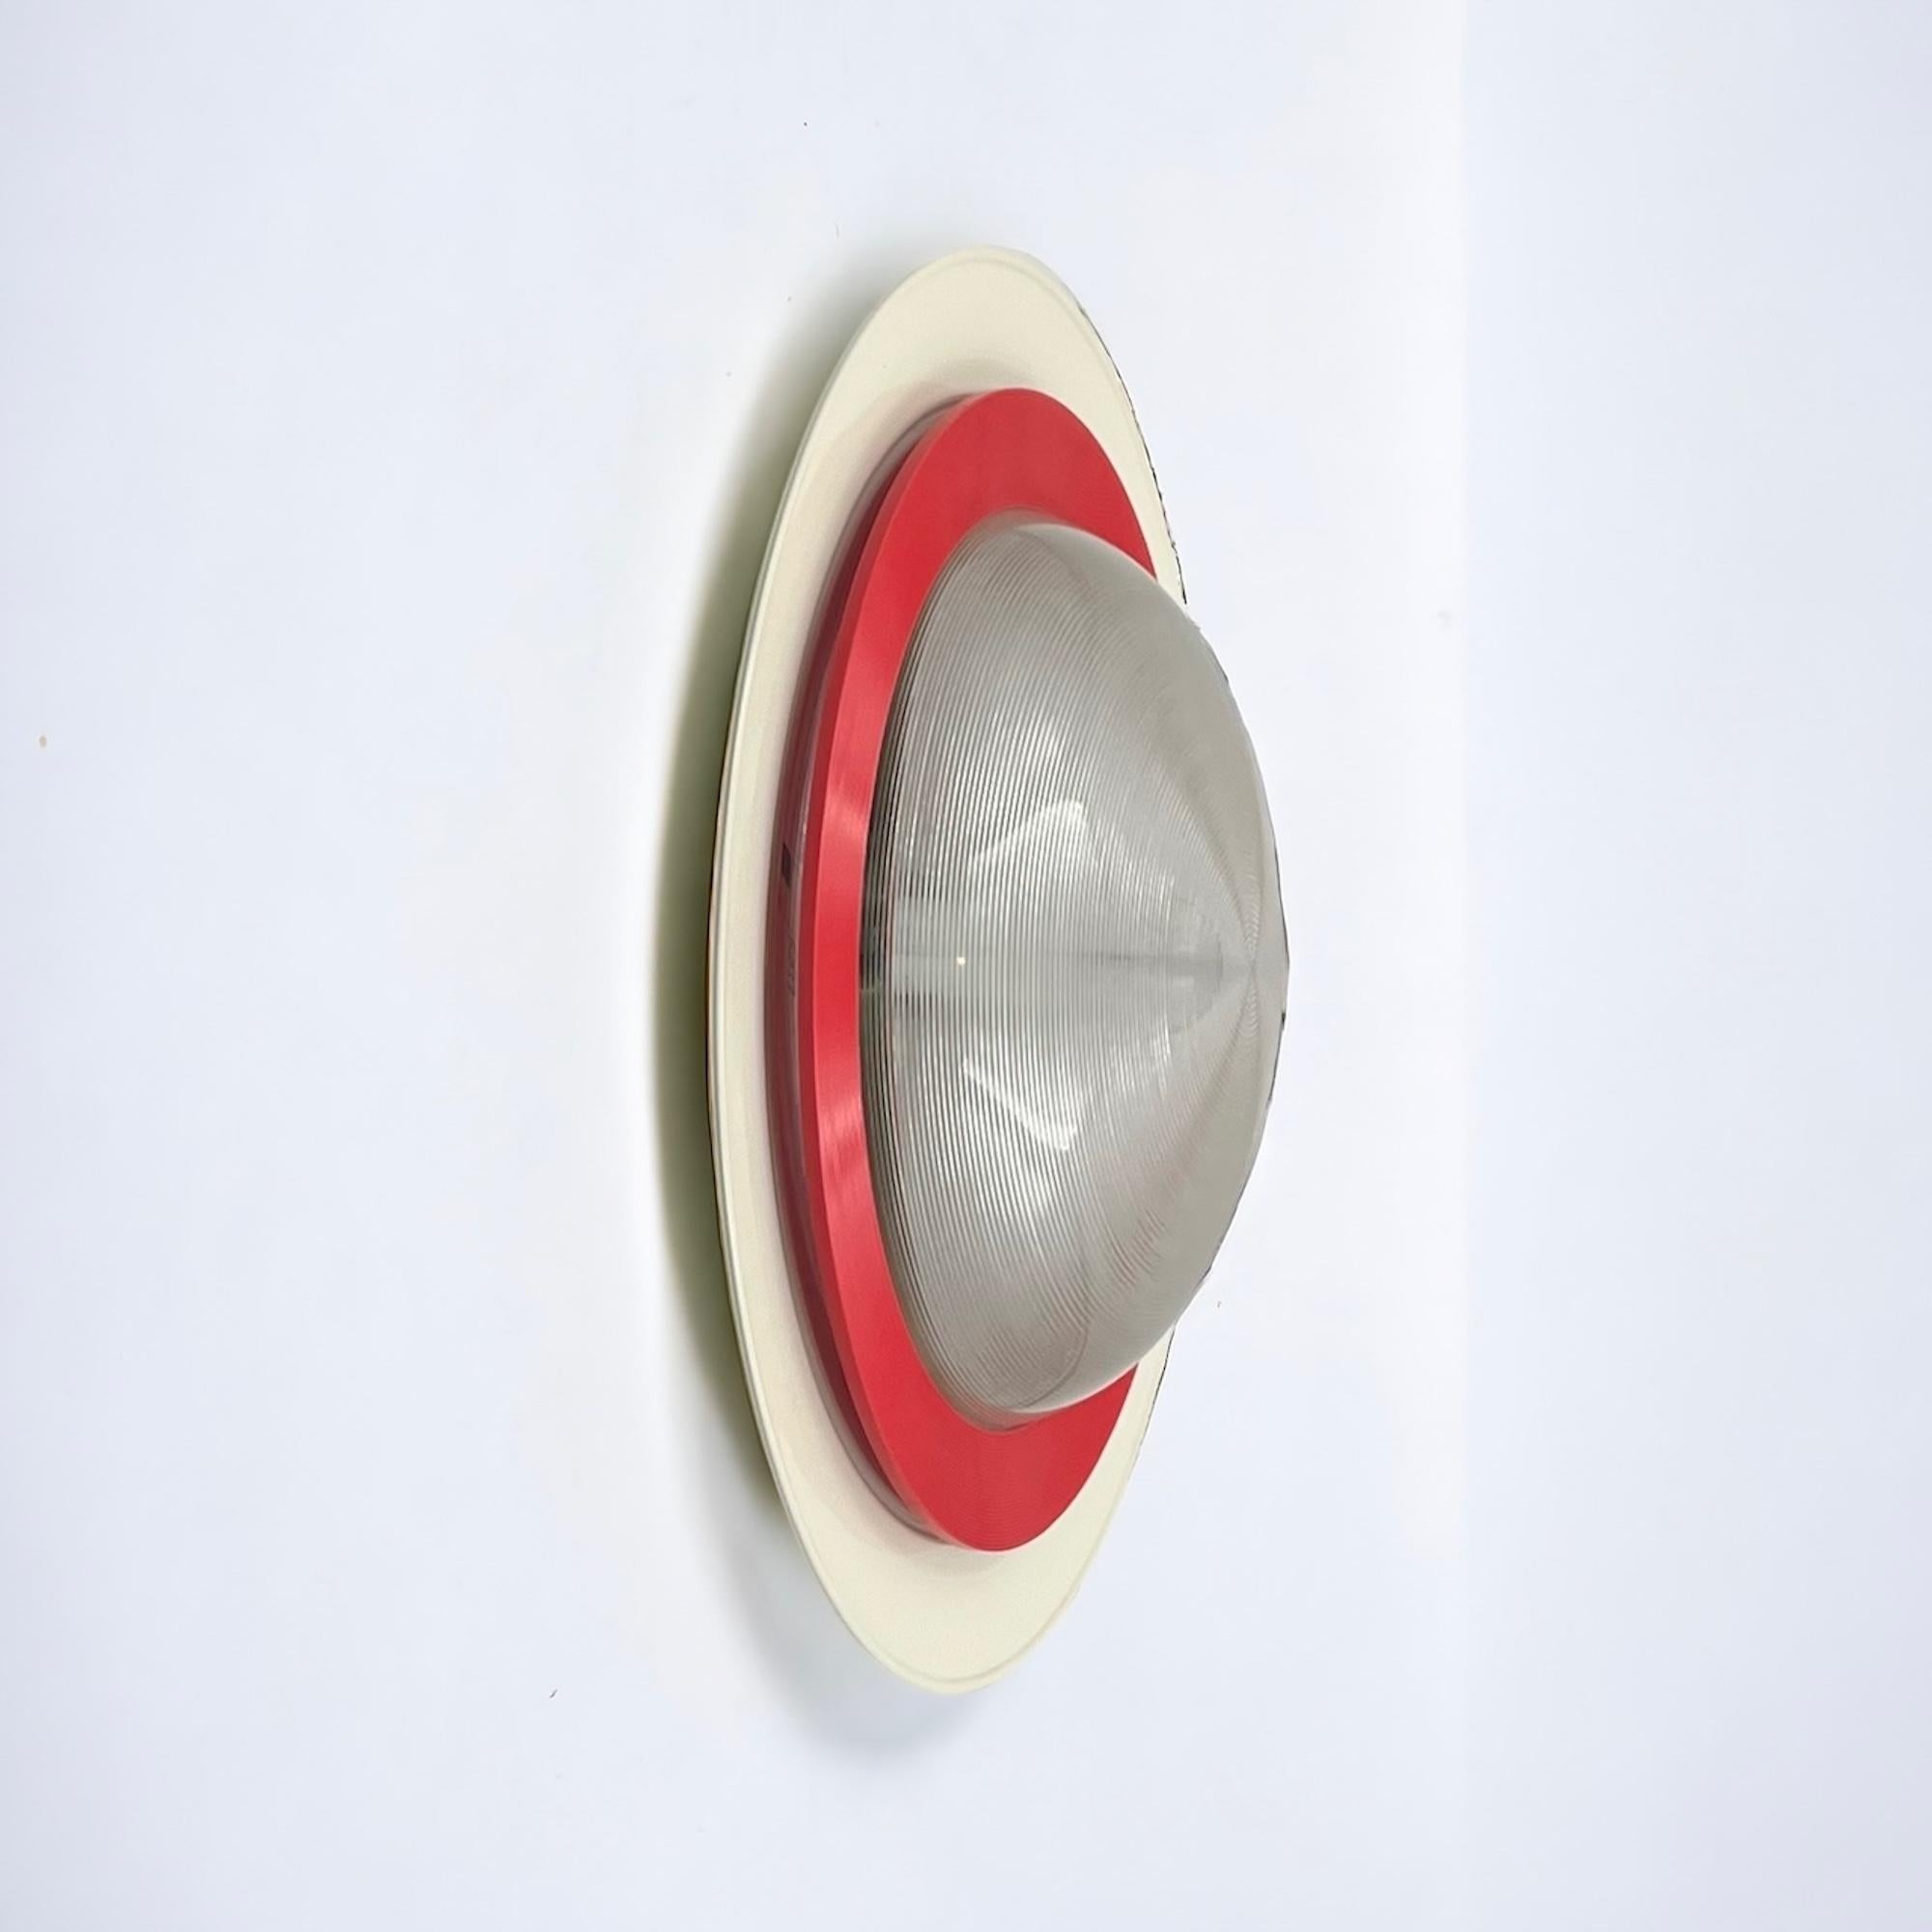 Dive into the nostalgia of the 1980s with the rare ‘Sat 50’ flush mount lamp by Luci Milano, a true gem of vintage design. This impressive 80s design lamp, a maxi version of the iconic creation by Gigante Boccato and Zambusi, boasts a large white